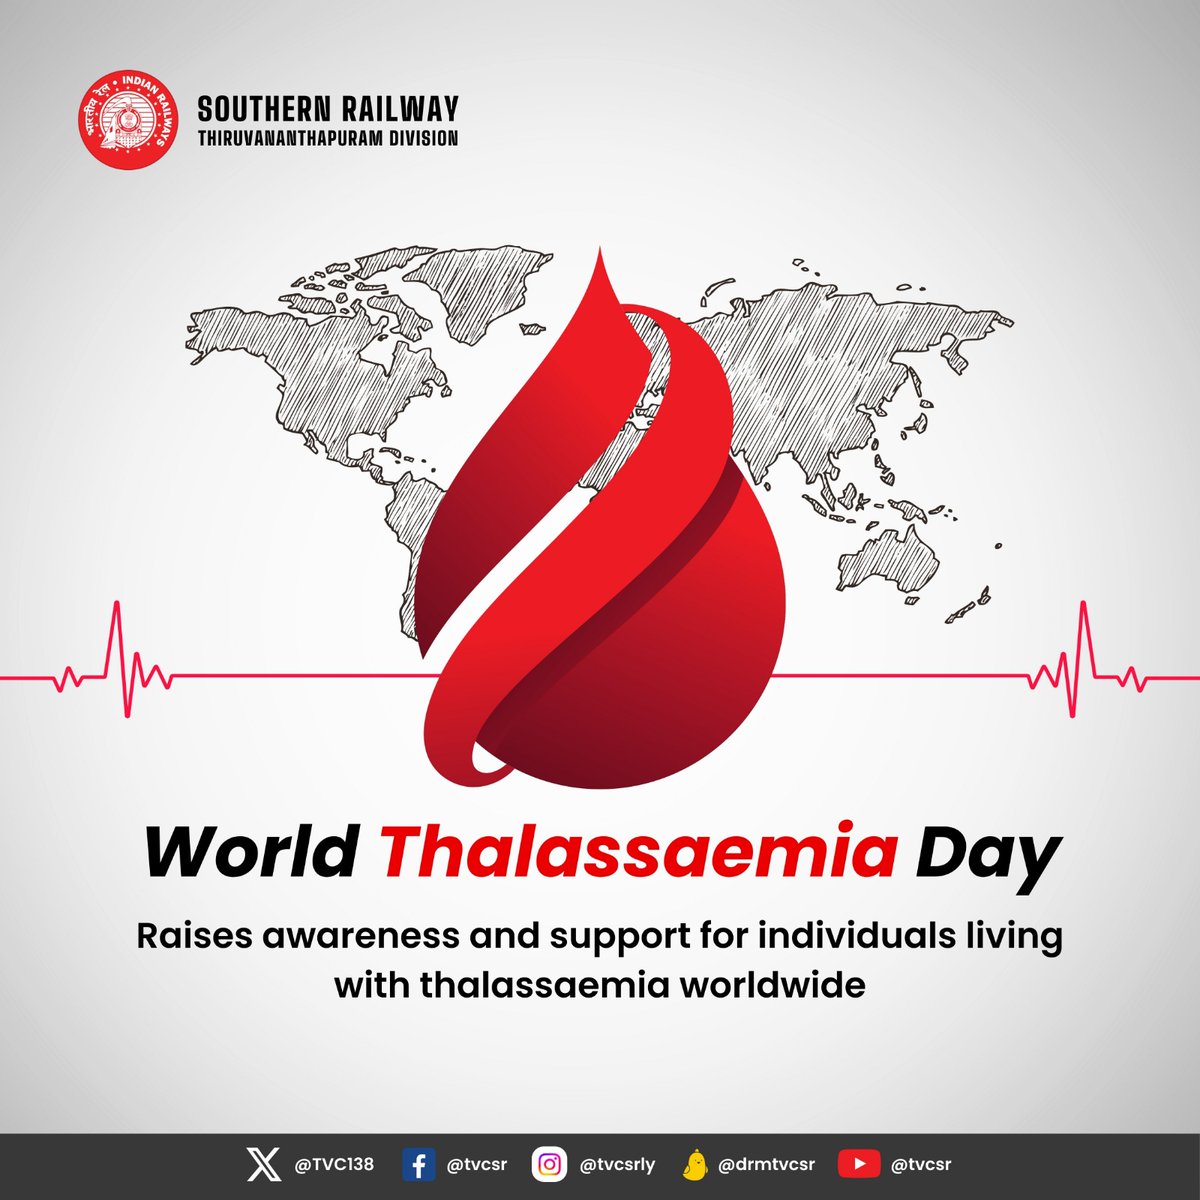 On #WorldThalassemiaDay, let's raise awareness about thalassemia and advocate for early detection, effective treatments, and continued research. Together, we can improve the quality of life for those living with this condition. 

#HealthAdvocacy #GeneticDisorders